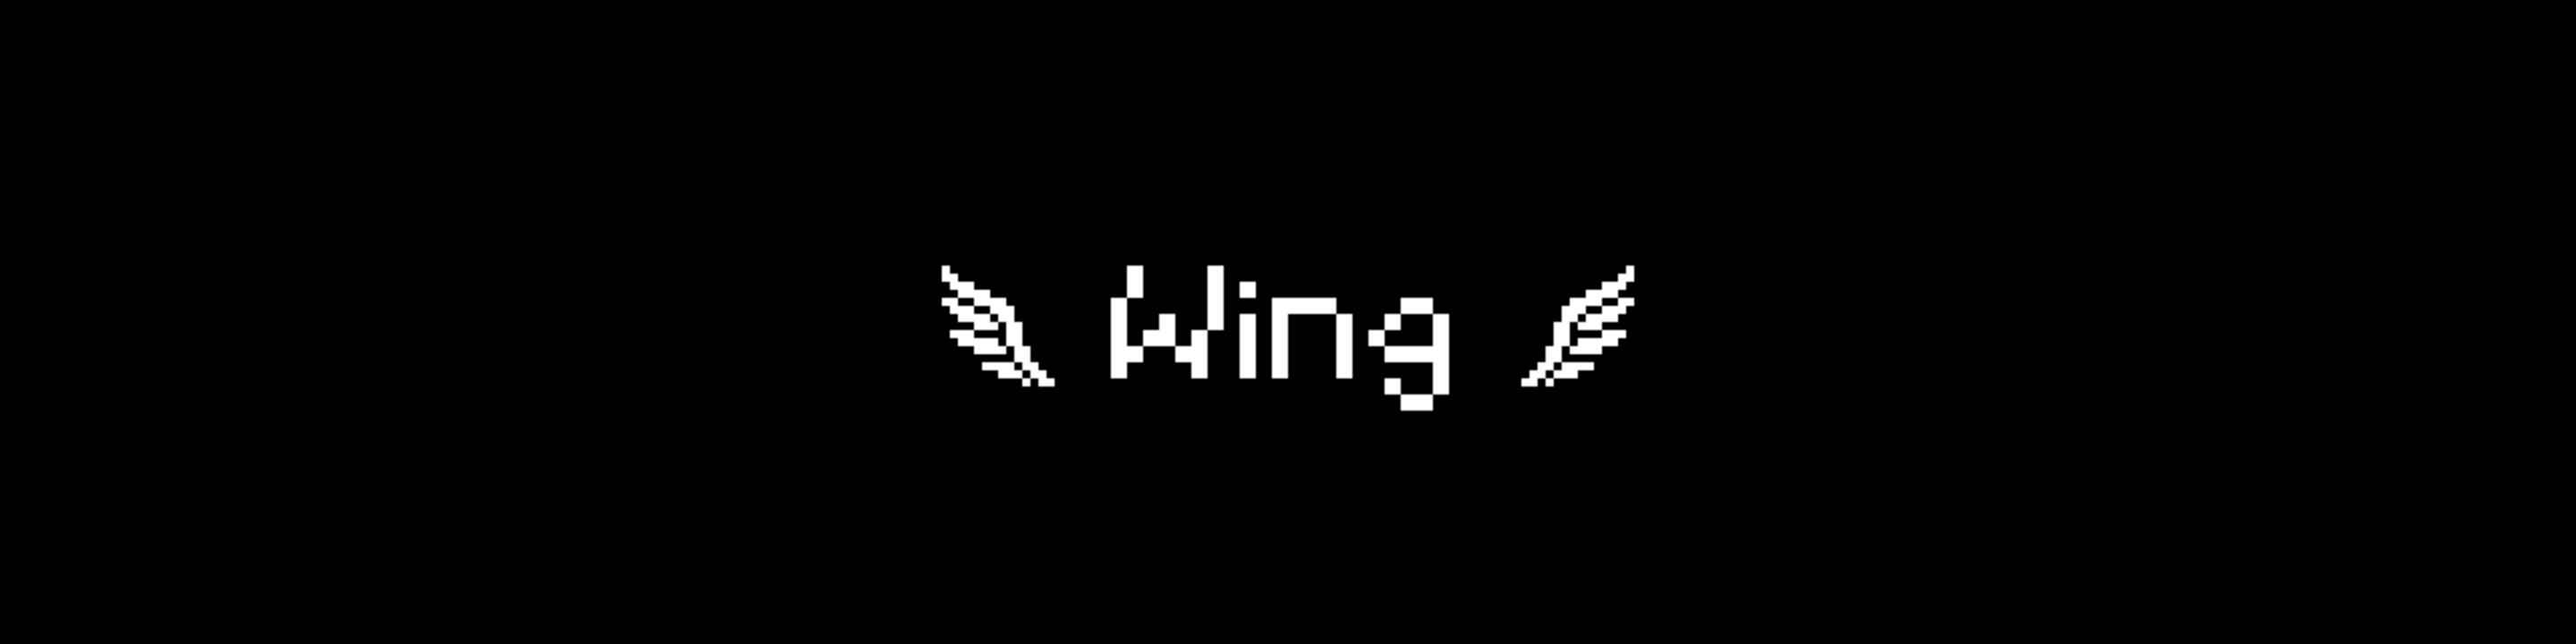 Wing (Demo)